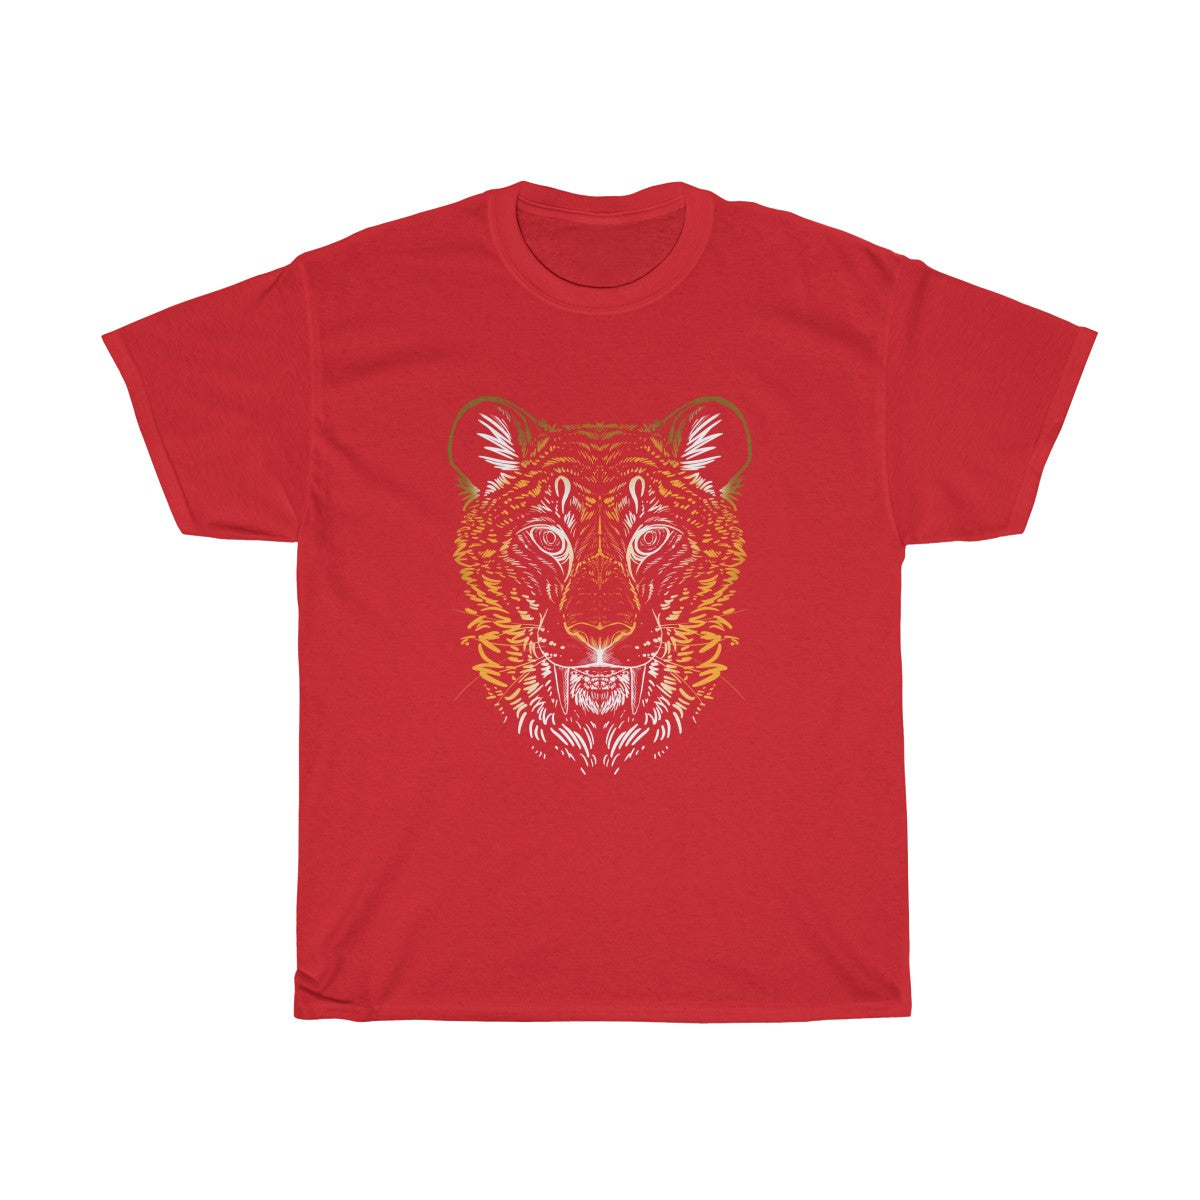 Sabertooth Colored - T-Shirt T-Shirt Dire Creatures Red S 